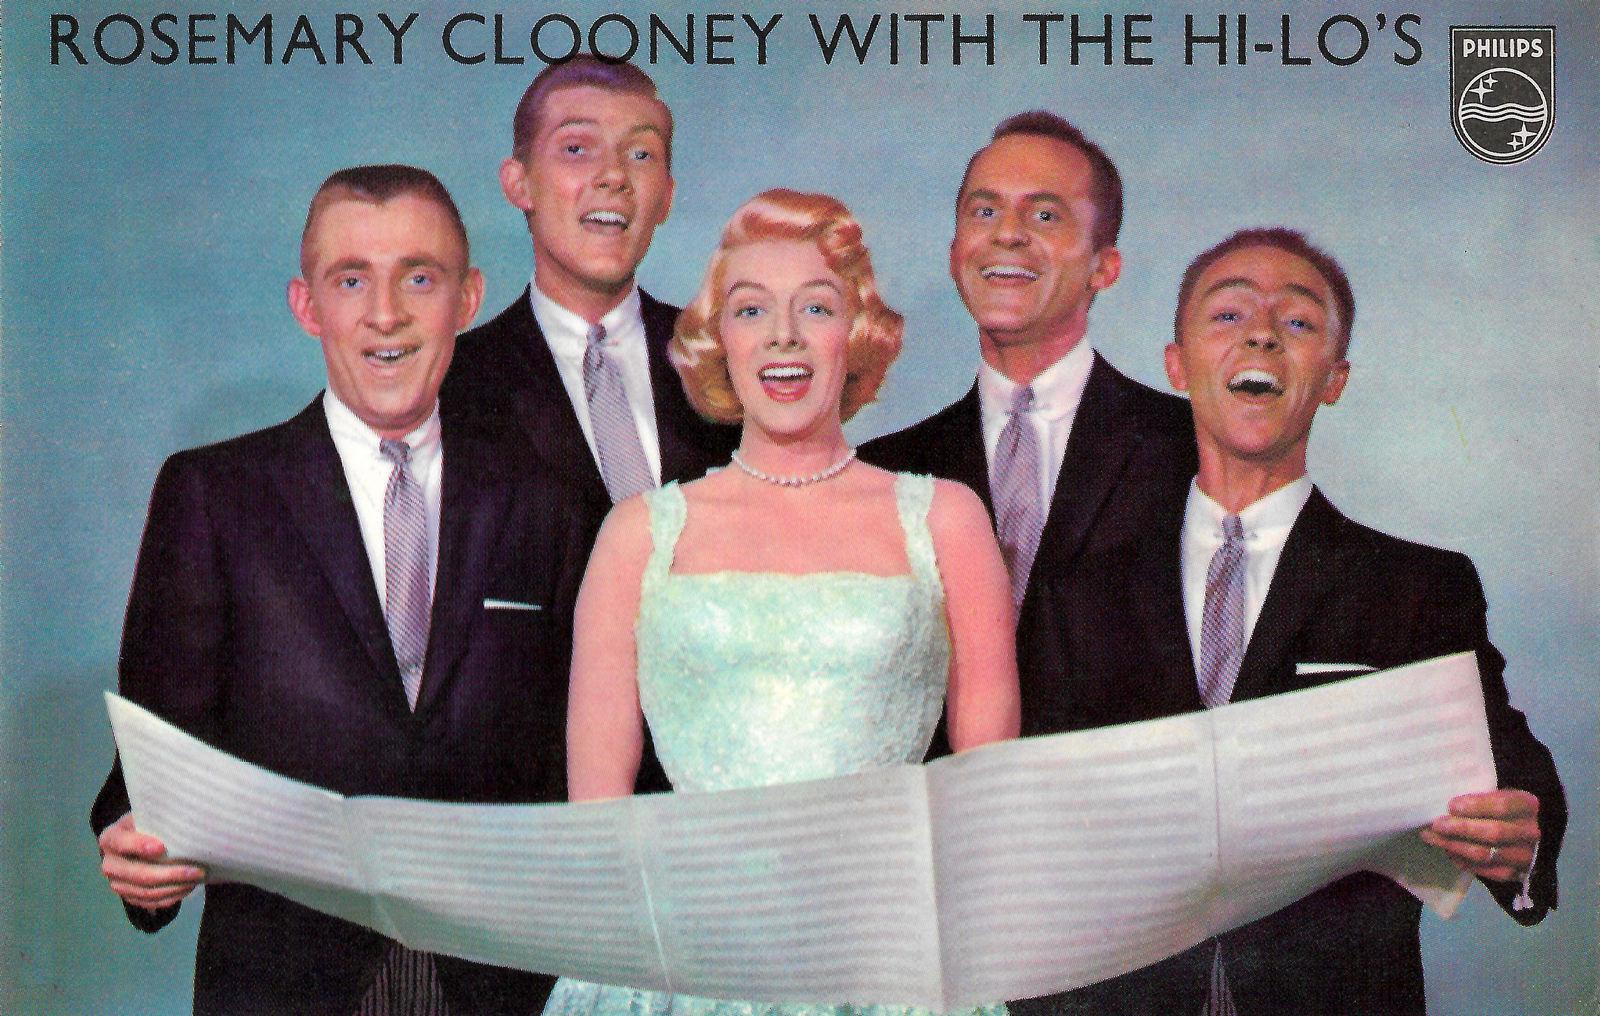 Rosemary Clooney with the Hi Lo's -1946.jpeg